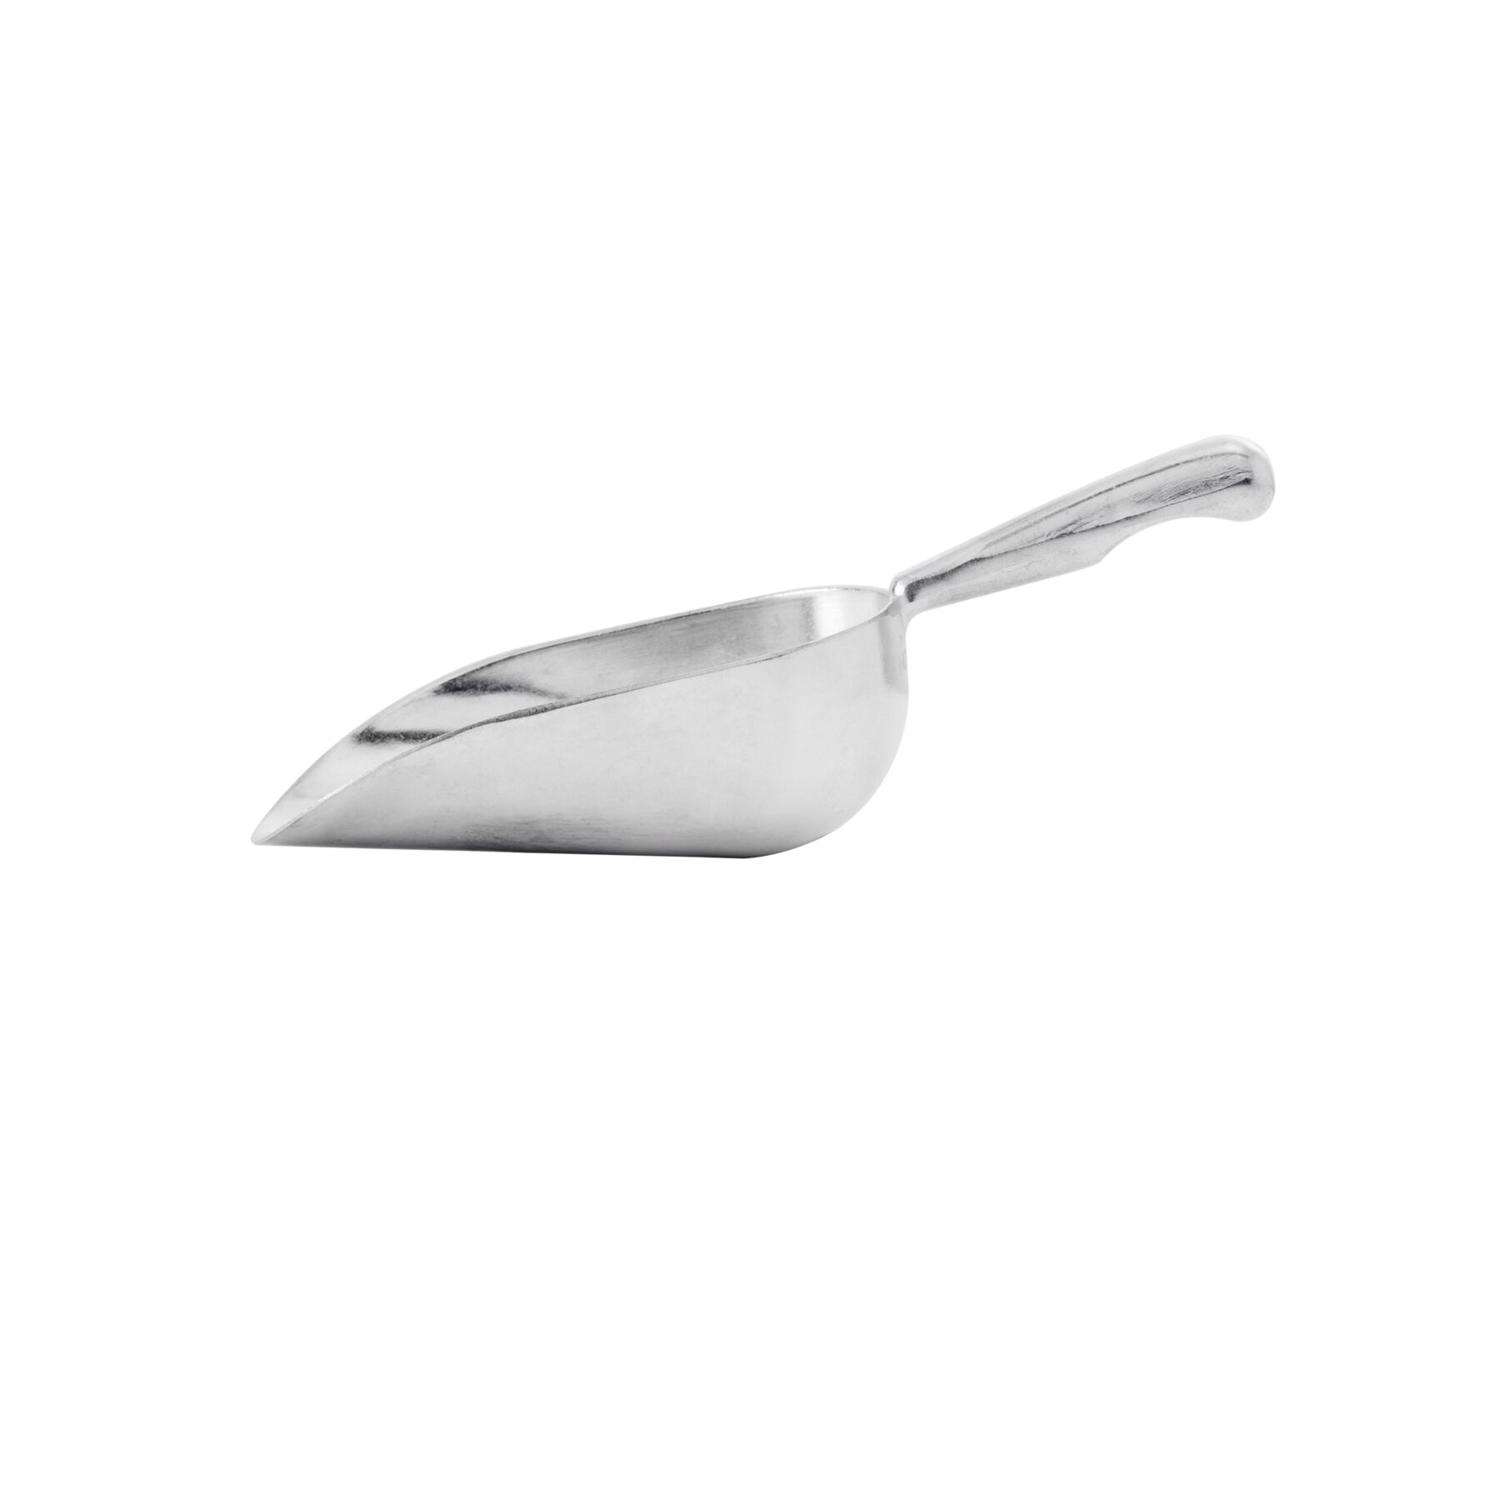 Ice Scoop Holder Stainless Steel, small only